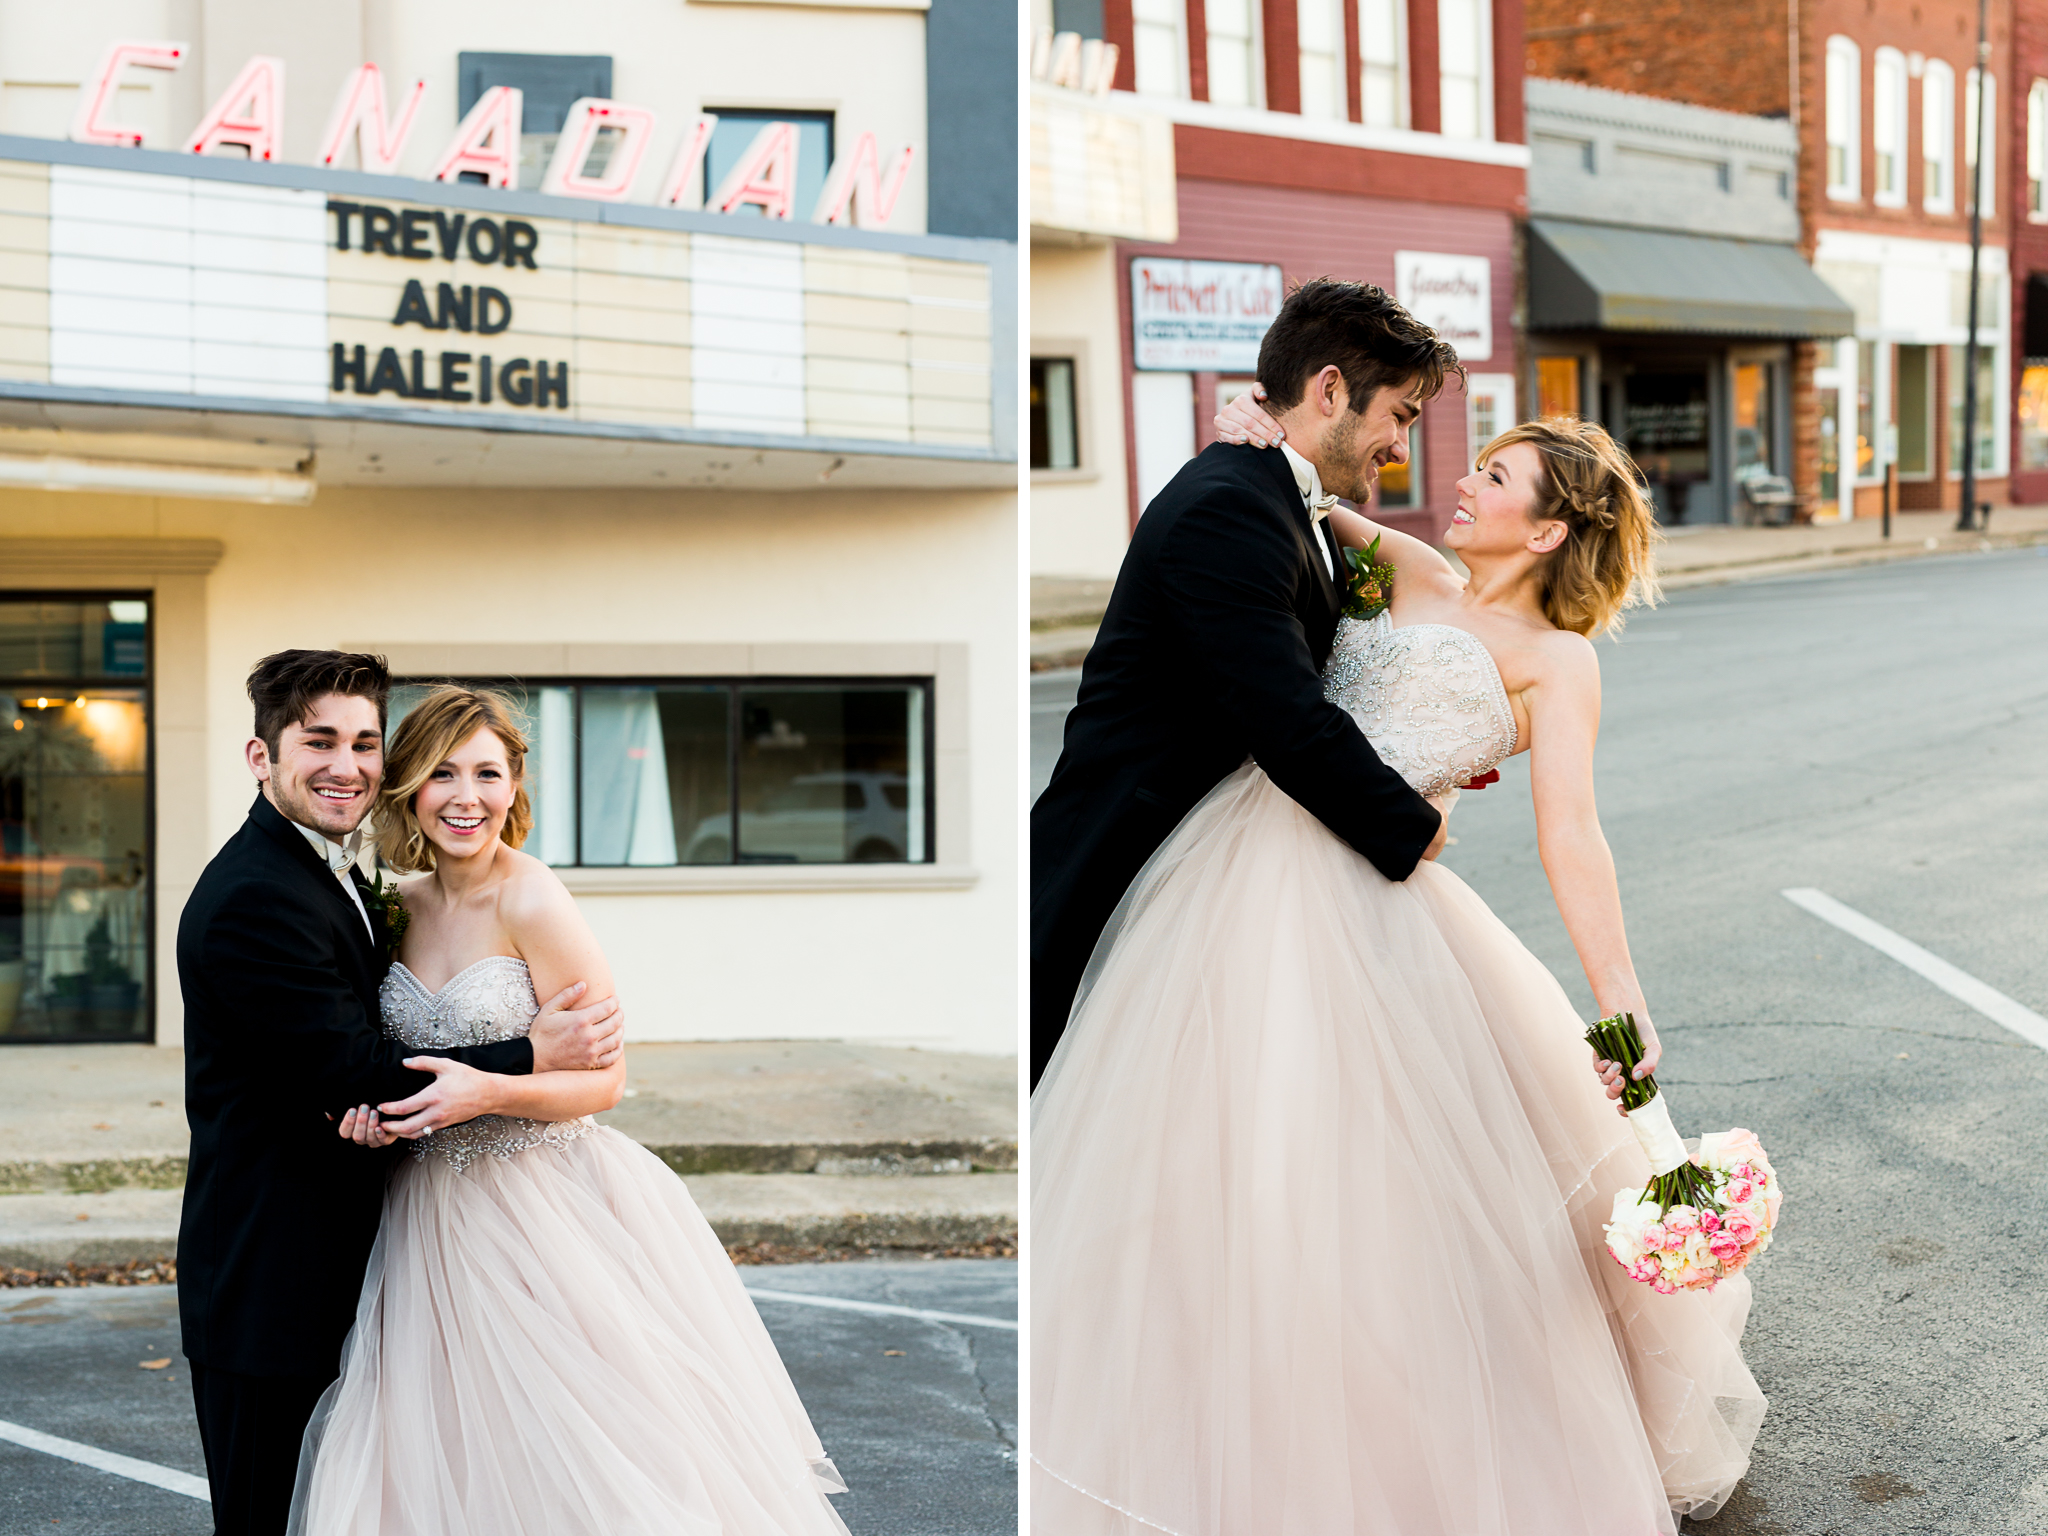 The Grand Canadian Theater OKC Purcell Wedding Venue Ashley Porton Photography downtown purcell.jpg